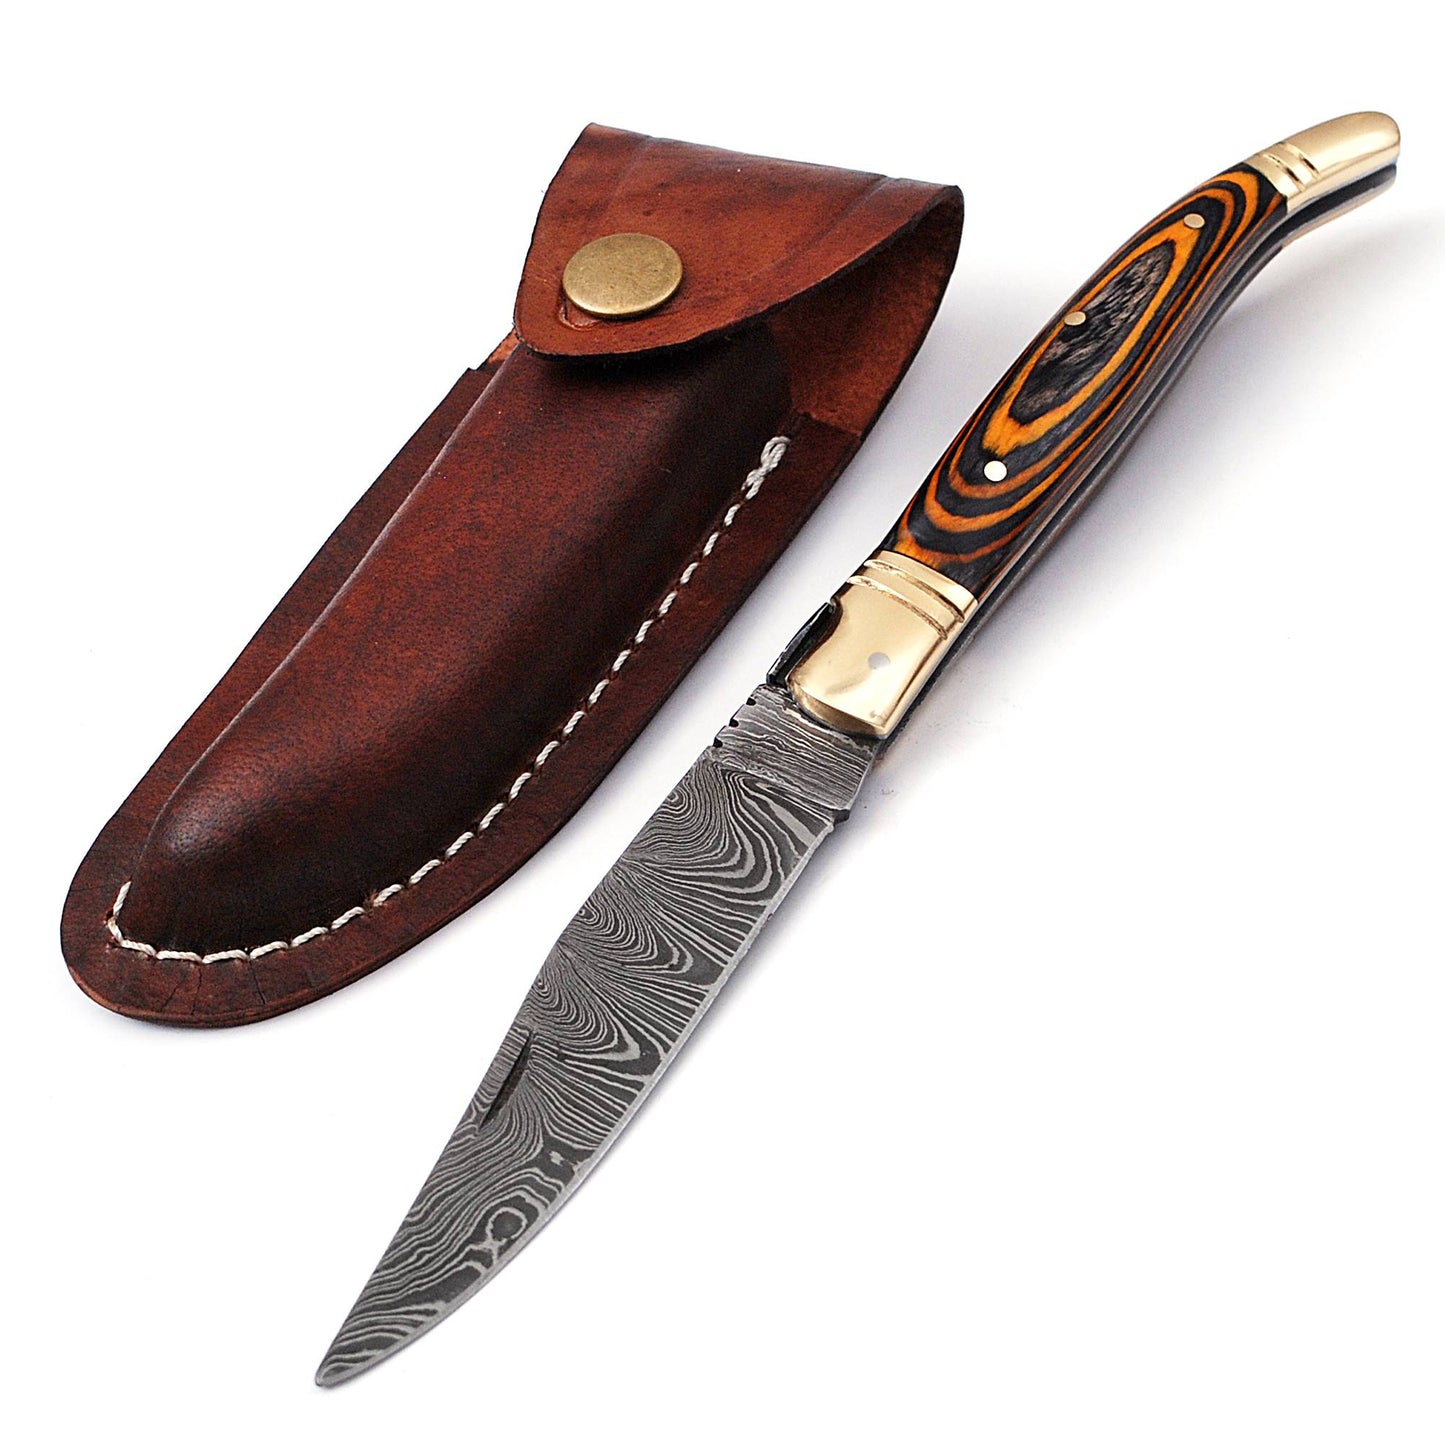 Copy of Folding Damascus steel knife, 8.5" Long with 4" hand forged custom twist pattern Blade. 2 tone Brown wood scale with brass bolster, Cow hide leather sheath included